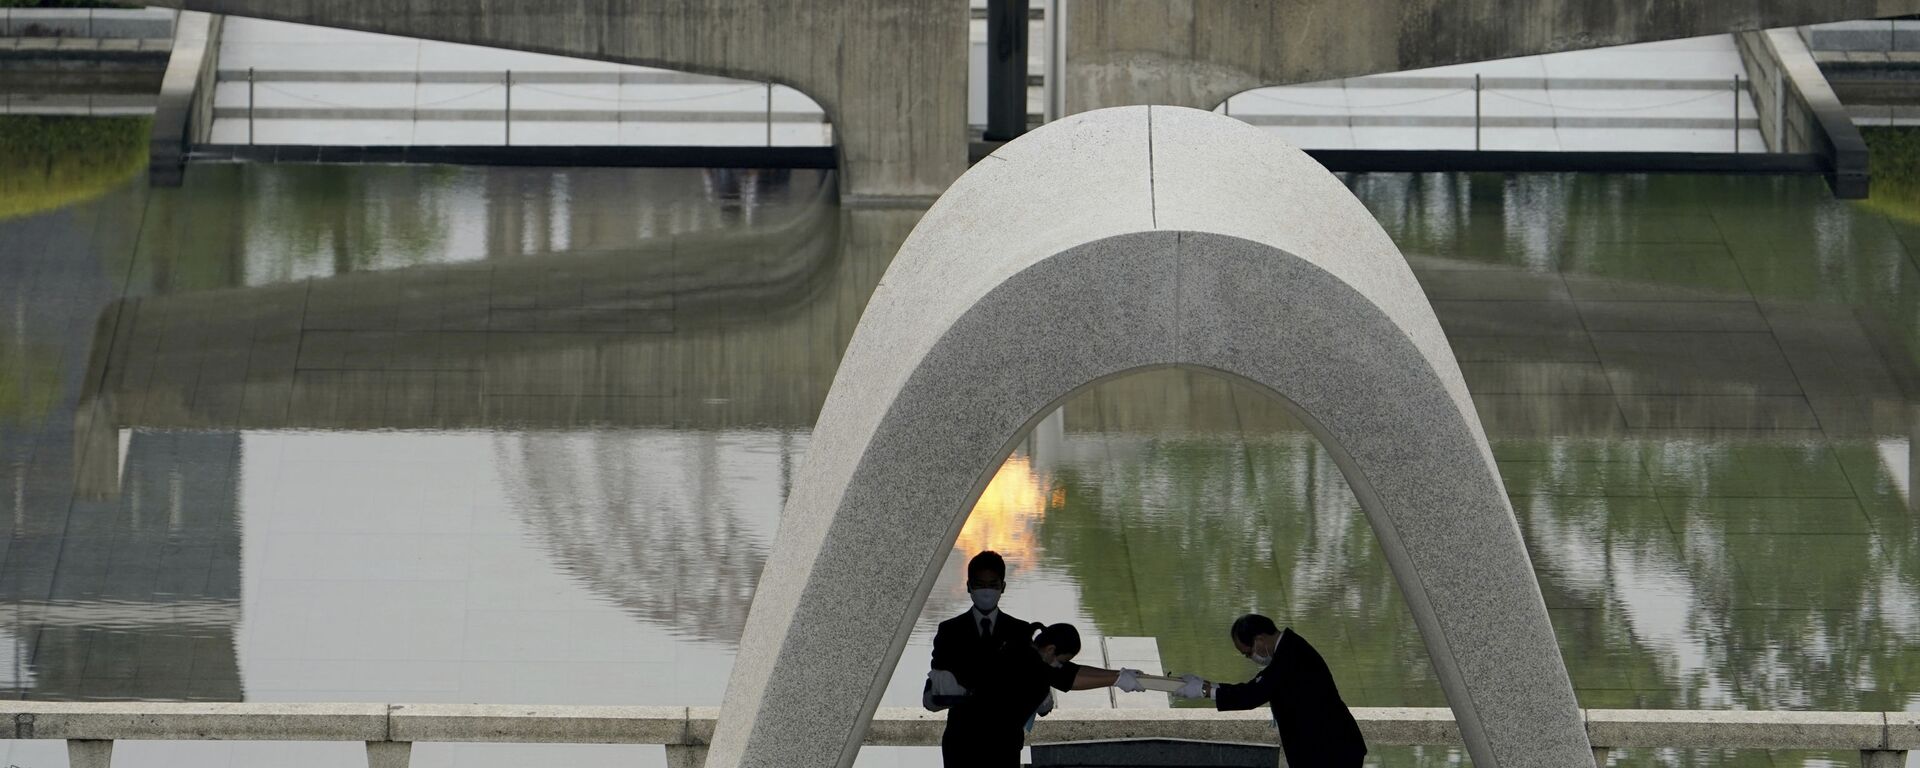 Kazumi Matsui, right, mayor of Hiroshima, and the family of the deceased bow before they place the victims list of the Atomic Bomb at Hiroshima Memorial Cenotaph during the ceremony to mark the 75th anniversary of the bombing at the Hiroshima Peace Memorial Park Thursday, Aug. 6, 2020, in Hiroshima, western Japan.  - Sputnik International, 1920, 06.08.2020